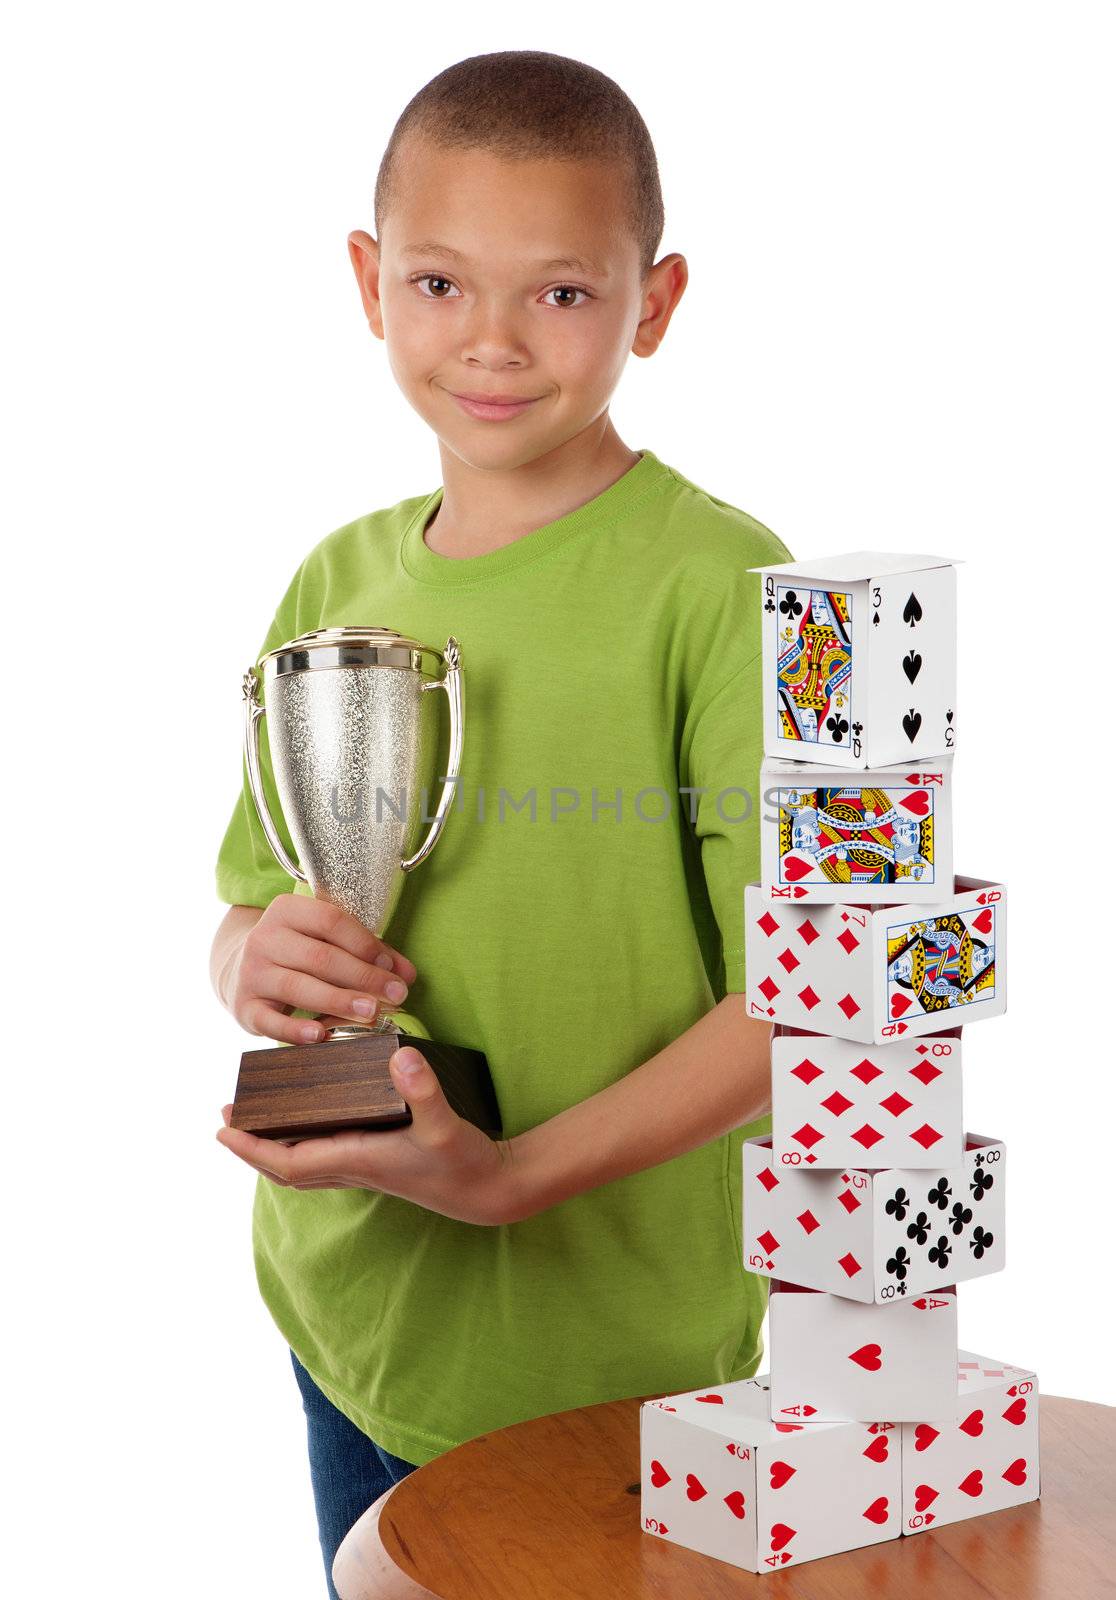 A young boy proudly holds the winning trophy in a playing card building competition.